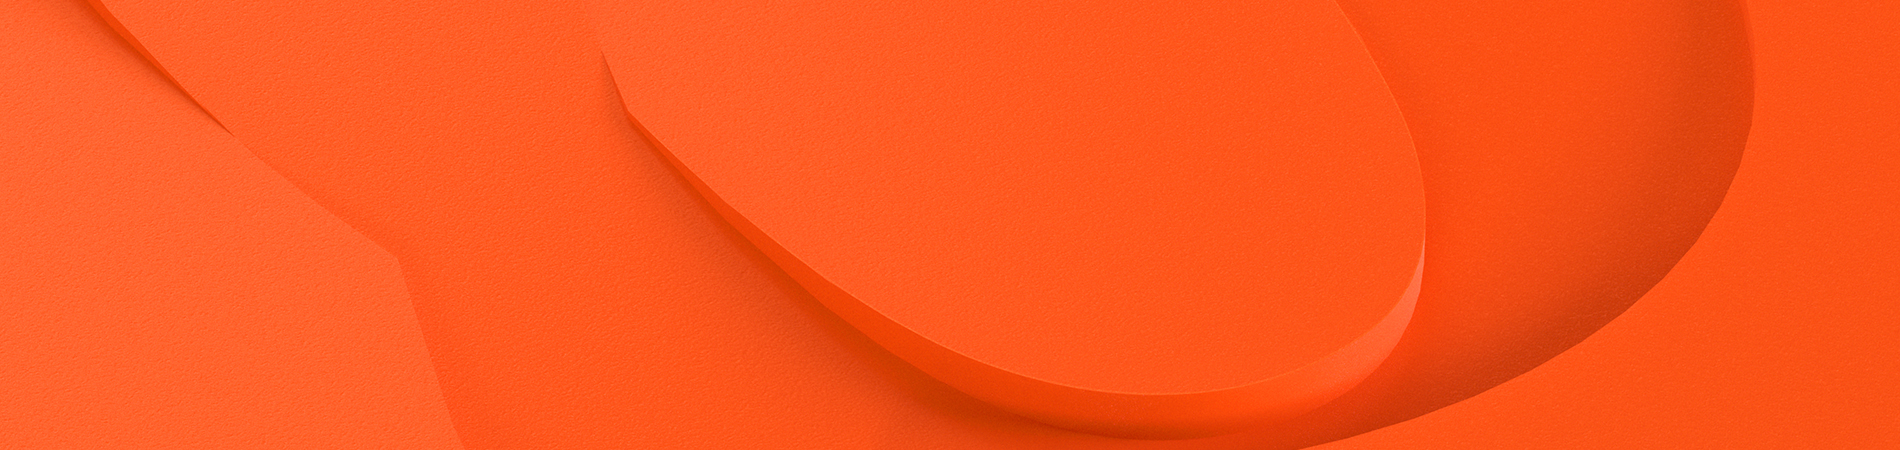 The "P" in PTSB on an orange stone textured background